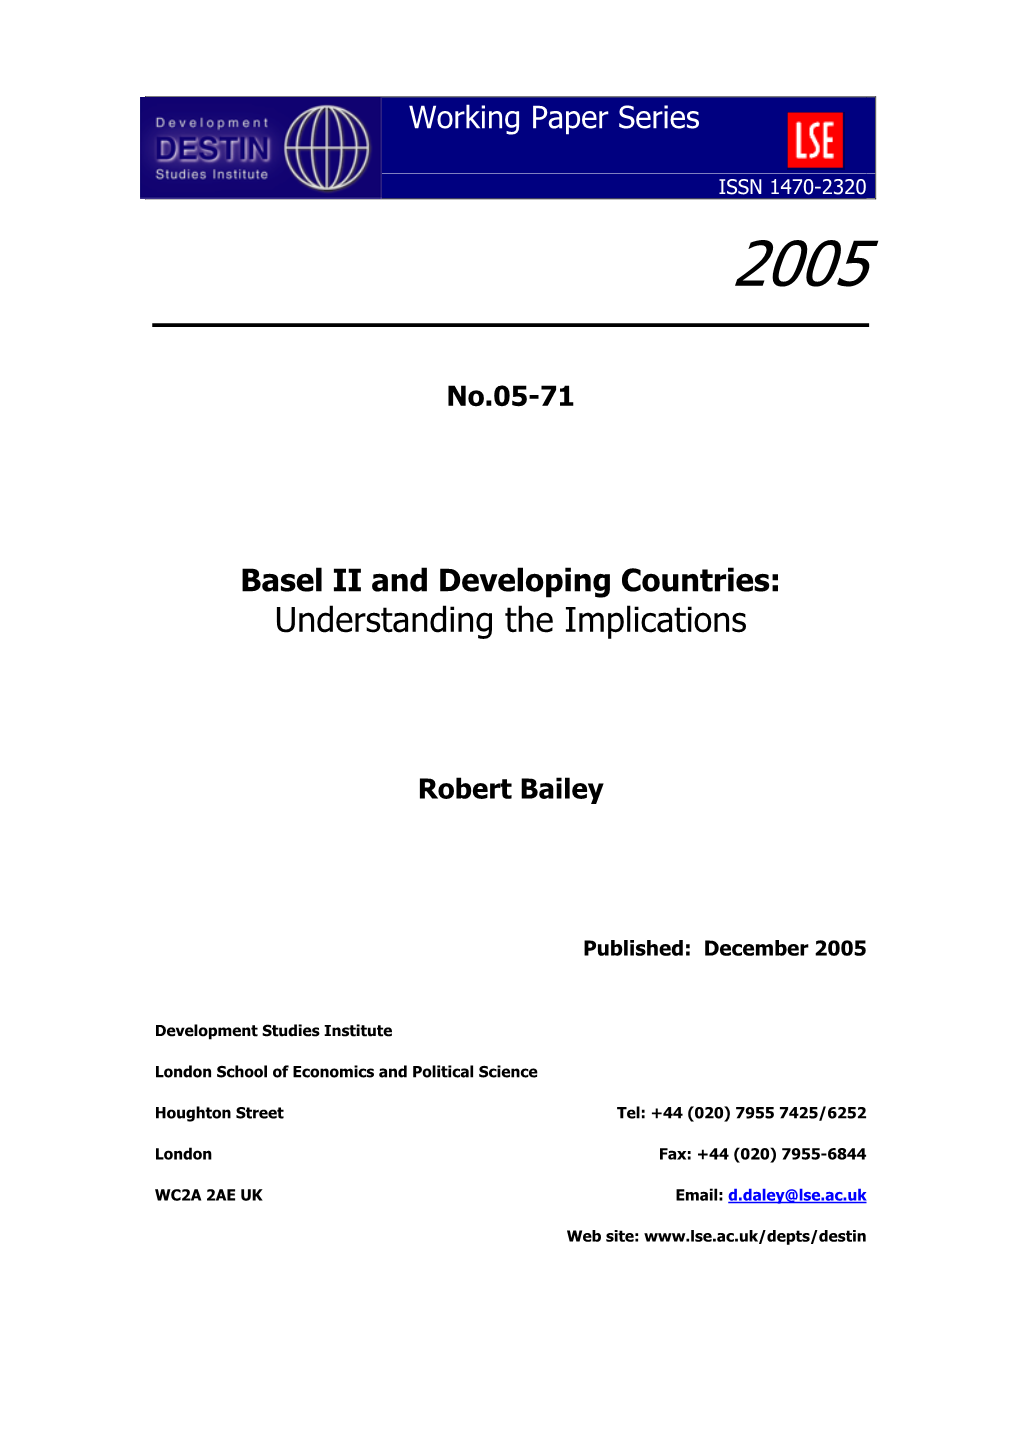 Basel II and Developing Countries: Understanding the Implications